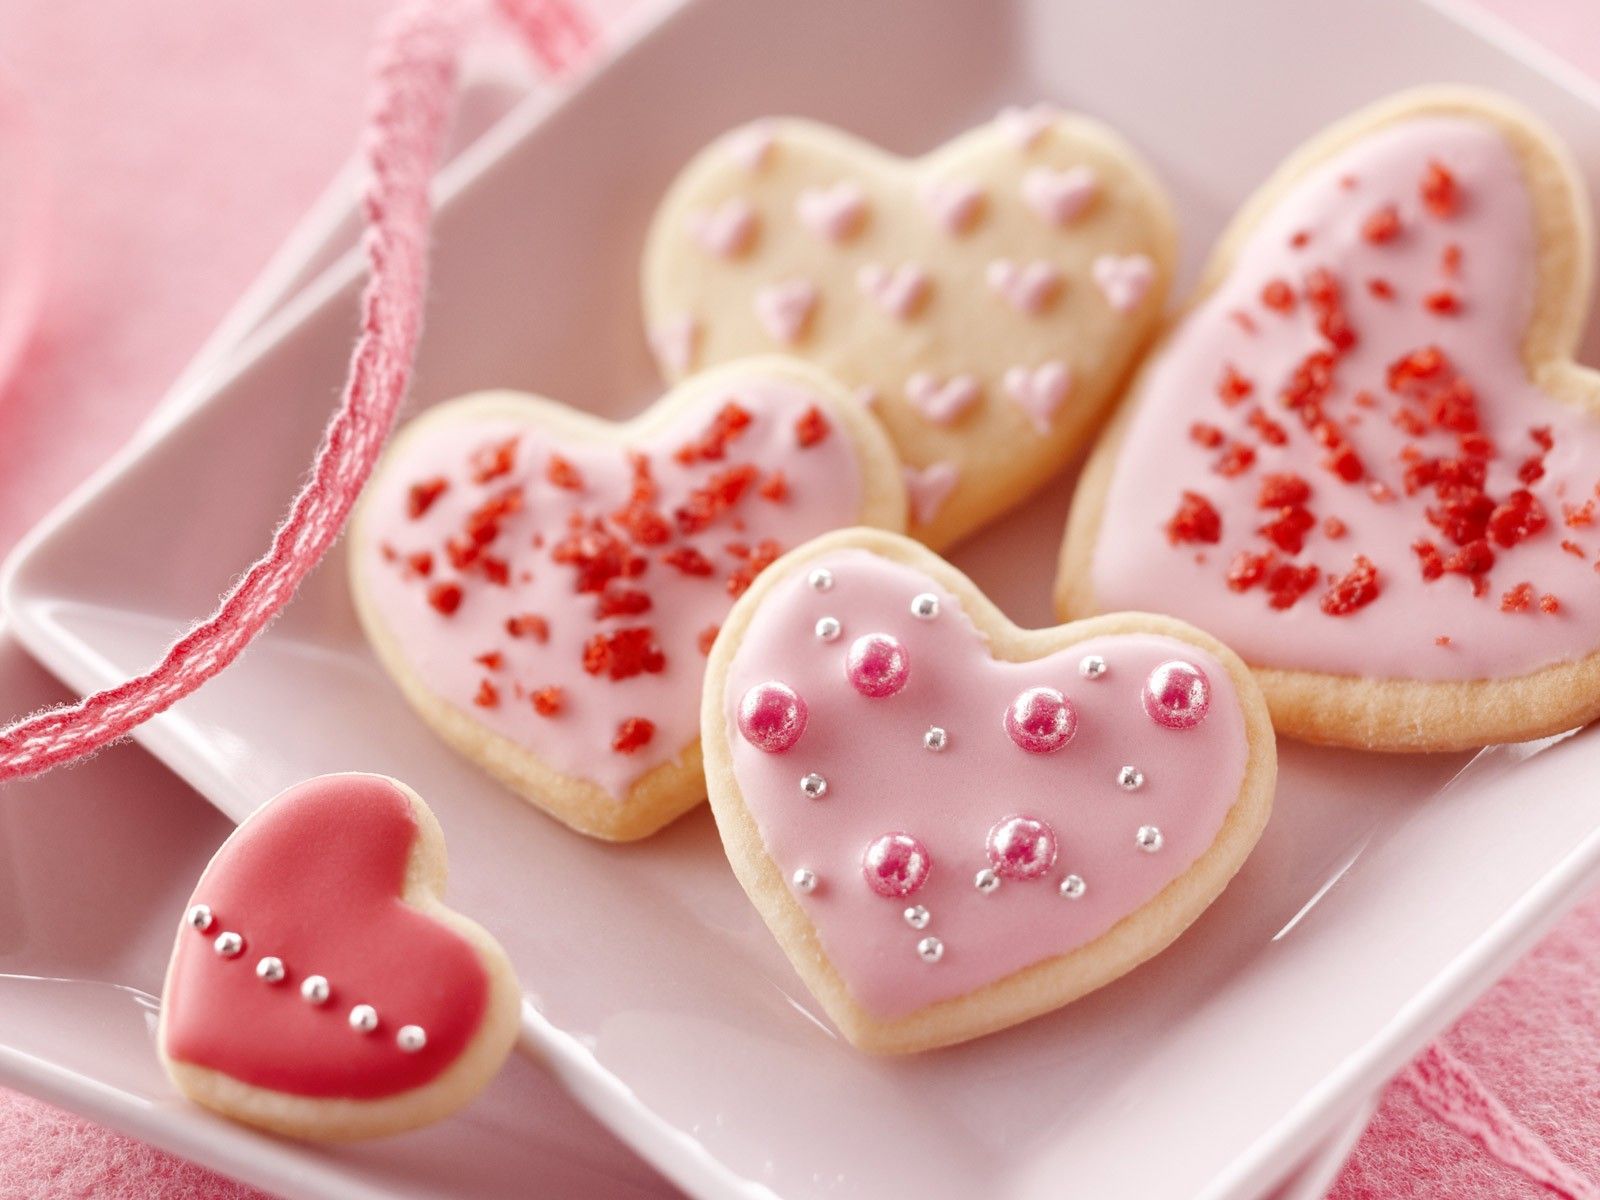 Sweet Cake In The Shape Of A Heart wallpaper. Homemade cookies, Valentine cookies, Heart shaped cookies